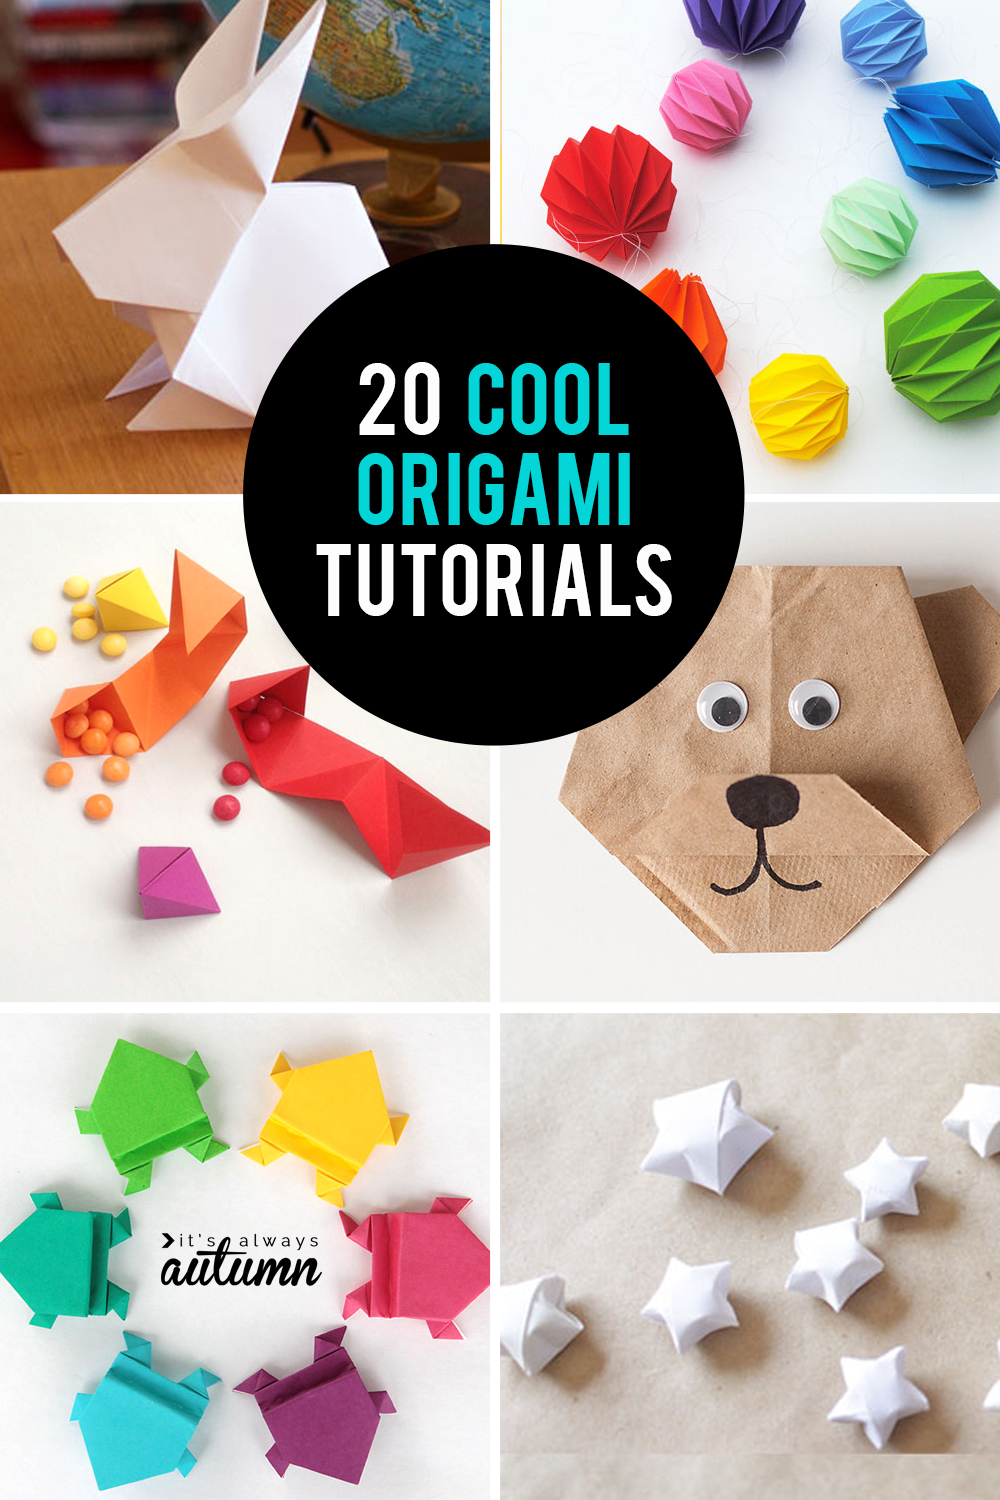 Download Origami Videos 20 Cool Origami Tutorials Kids And Adults Will Love Its Always